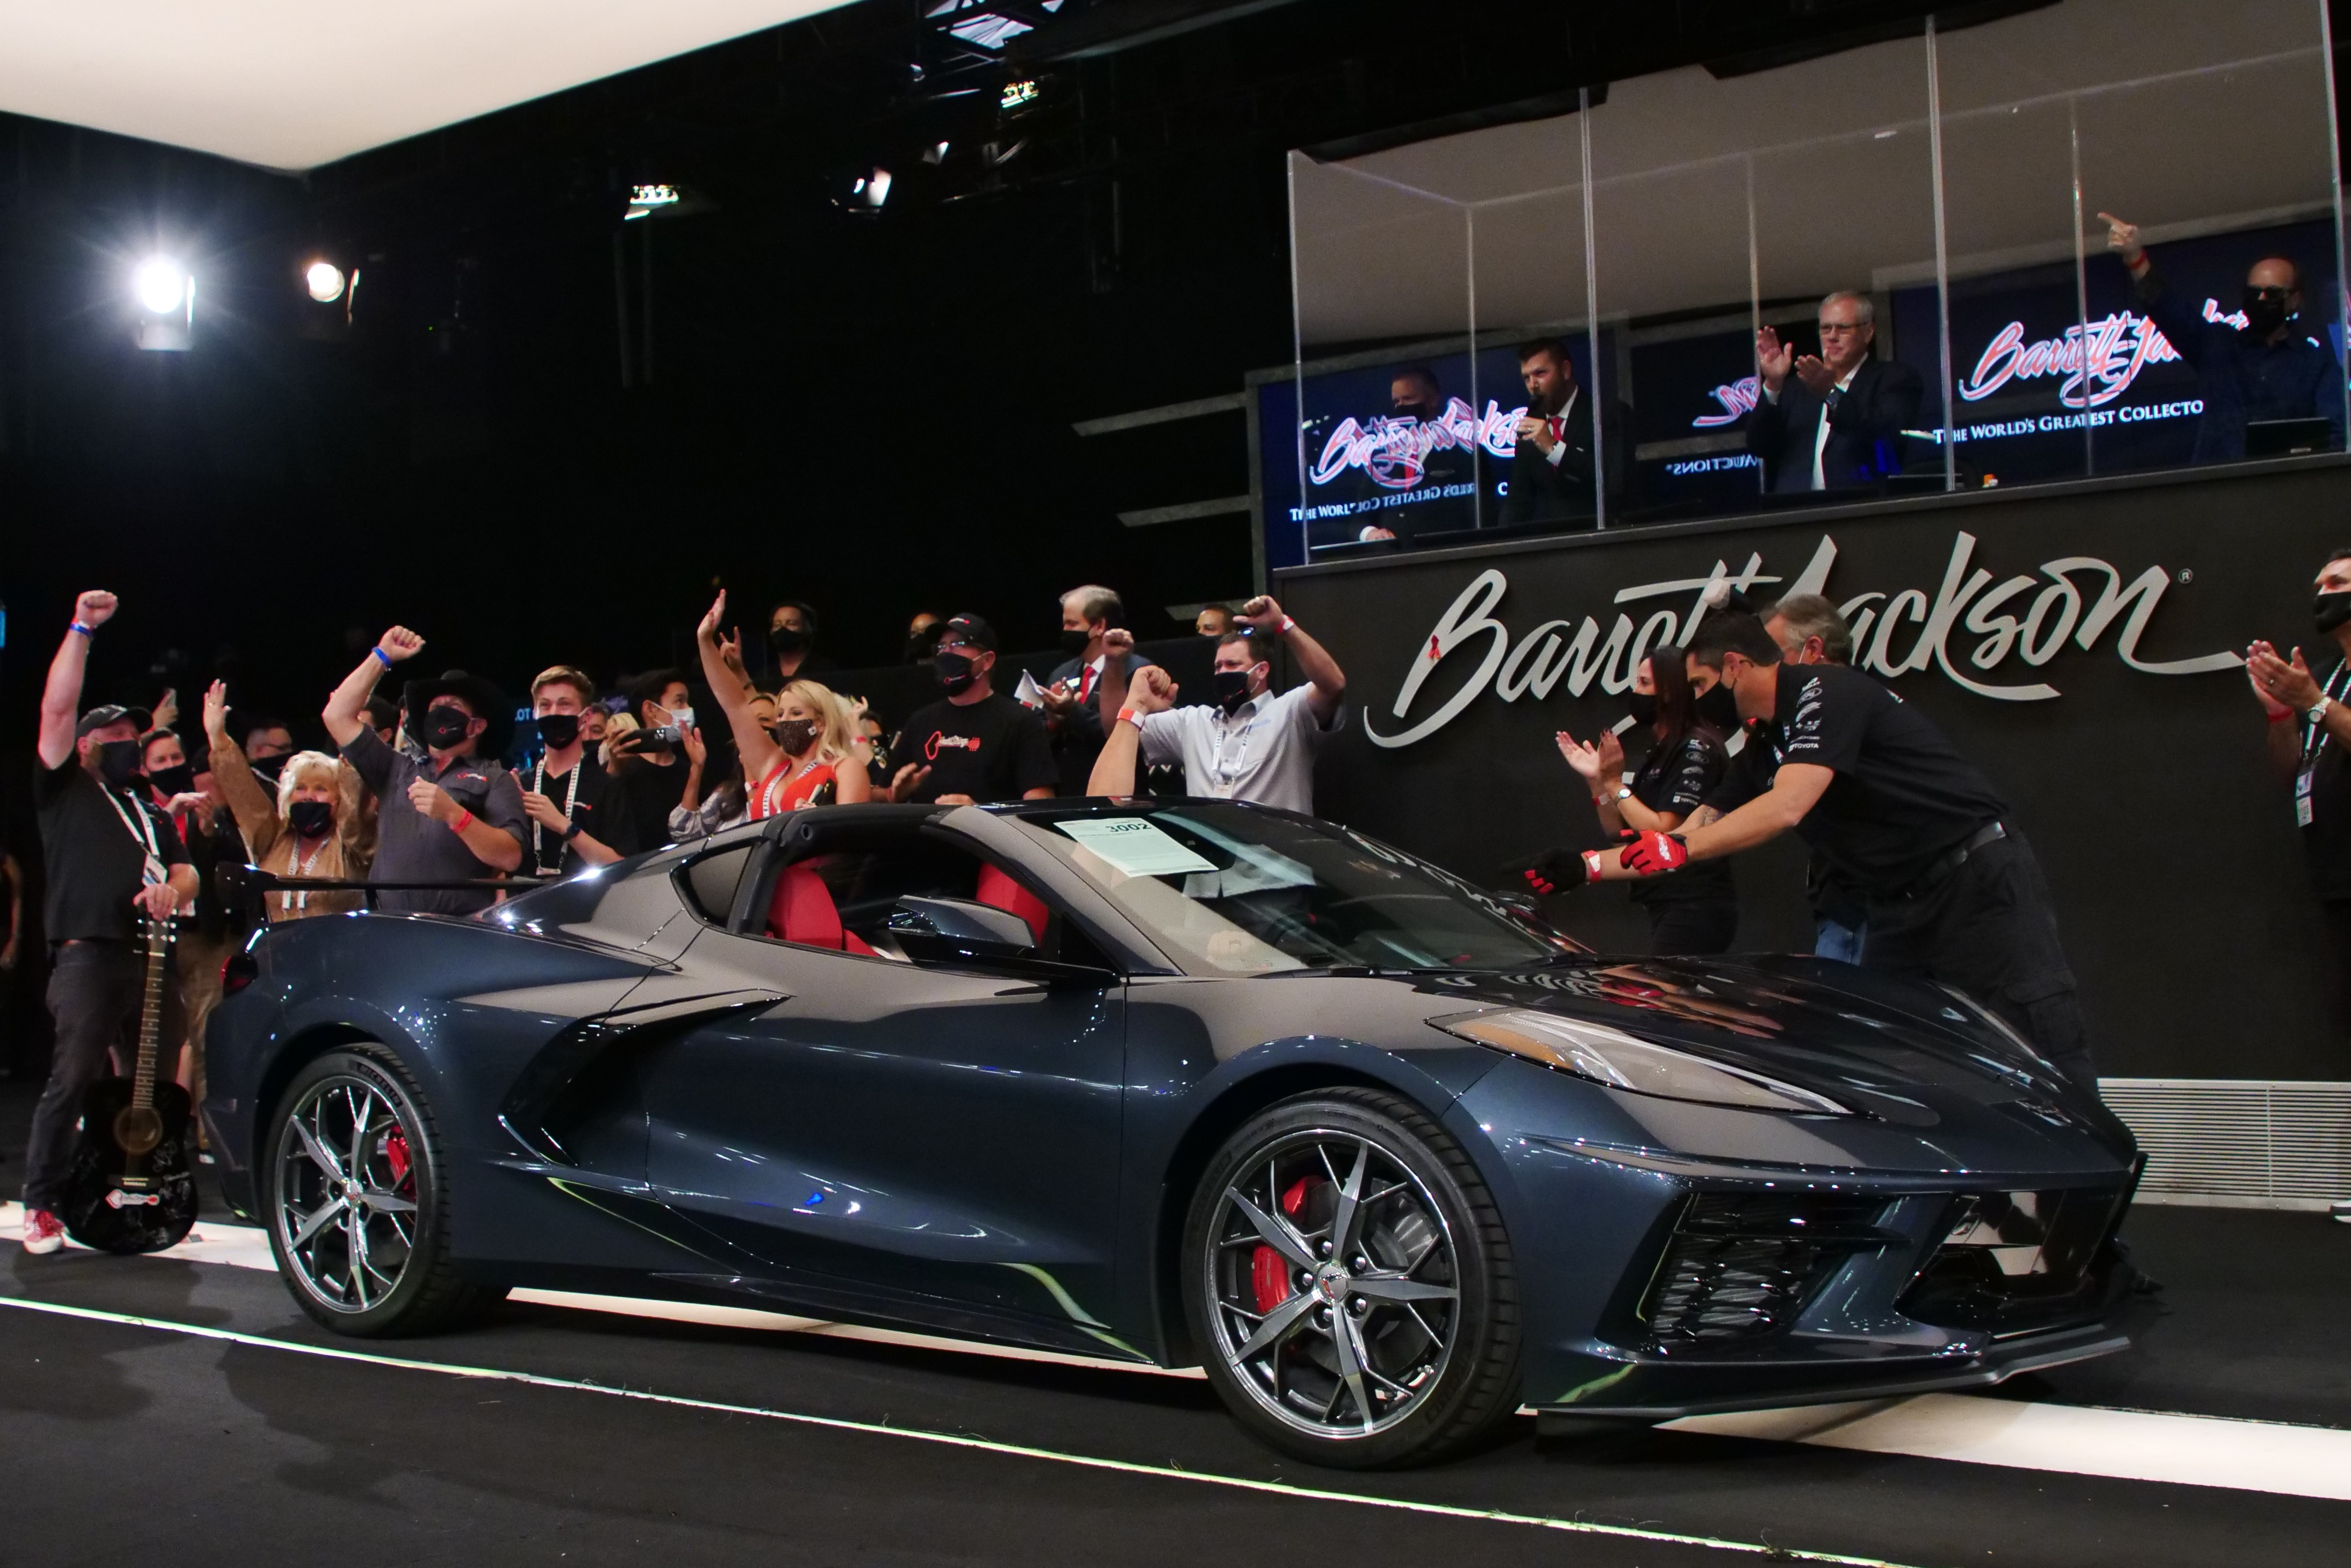 The top-selling Chevrolet of the 2020 Fall Auction was this 2020 Corvette, which sold for $370,000 to benefit the HeartStrings Foundation.